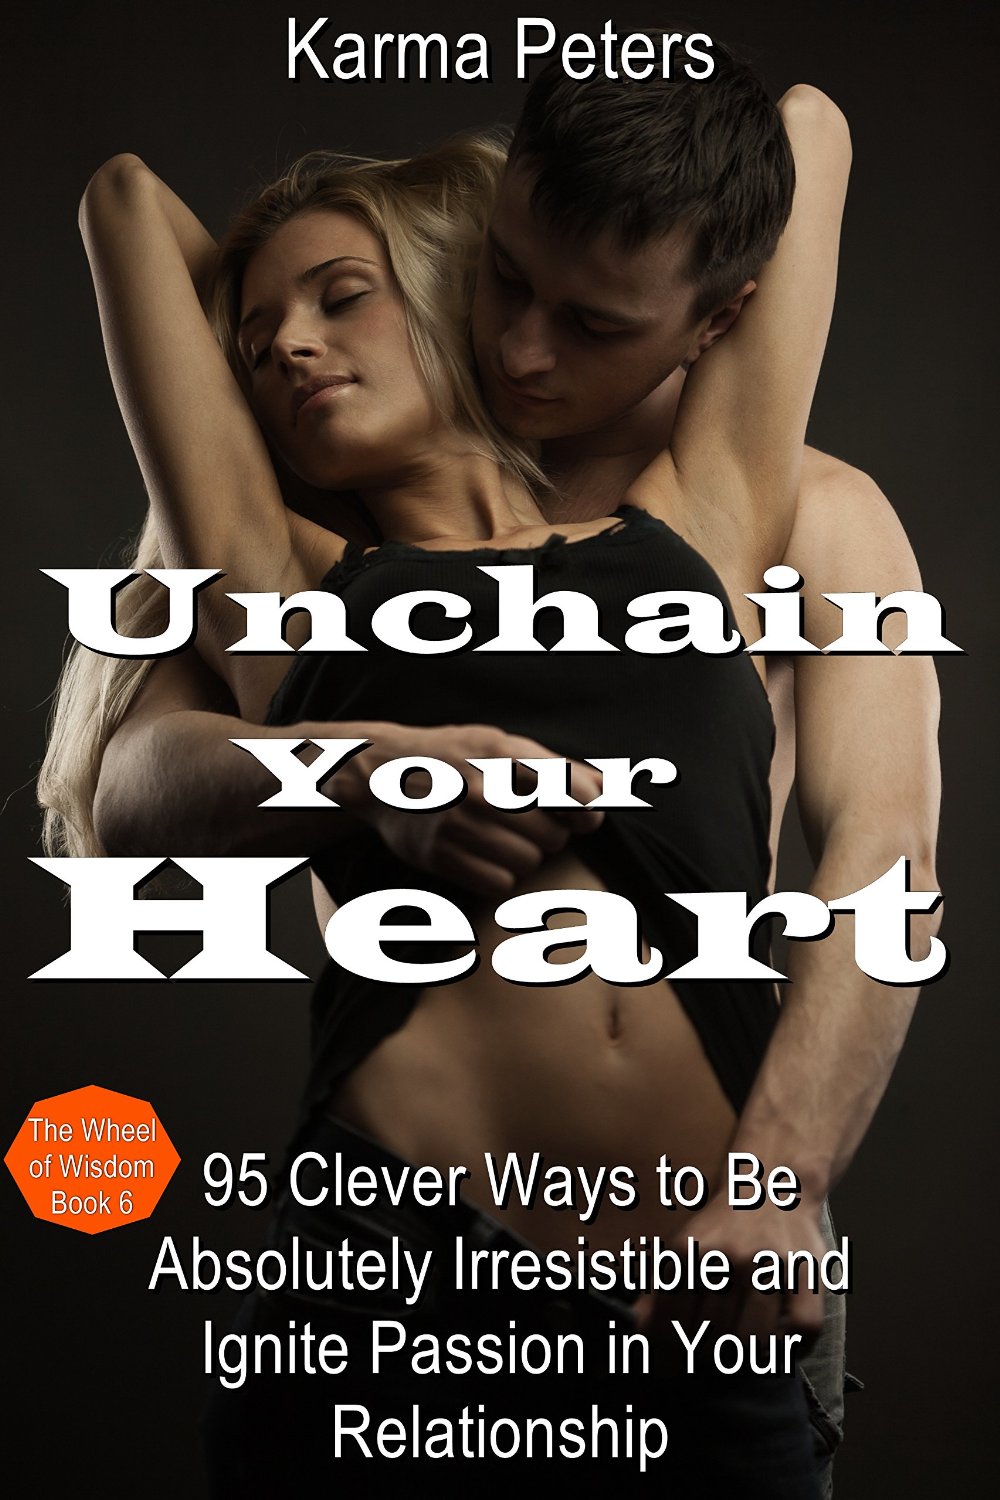 Unchain Your Heart: 95 Clever Ways to Be Absolutely Irresistible and Ignite Passion in Your Relationship (The Wheel of Wisdom Book 6) by Karma Peters